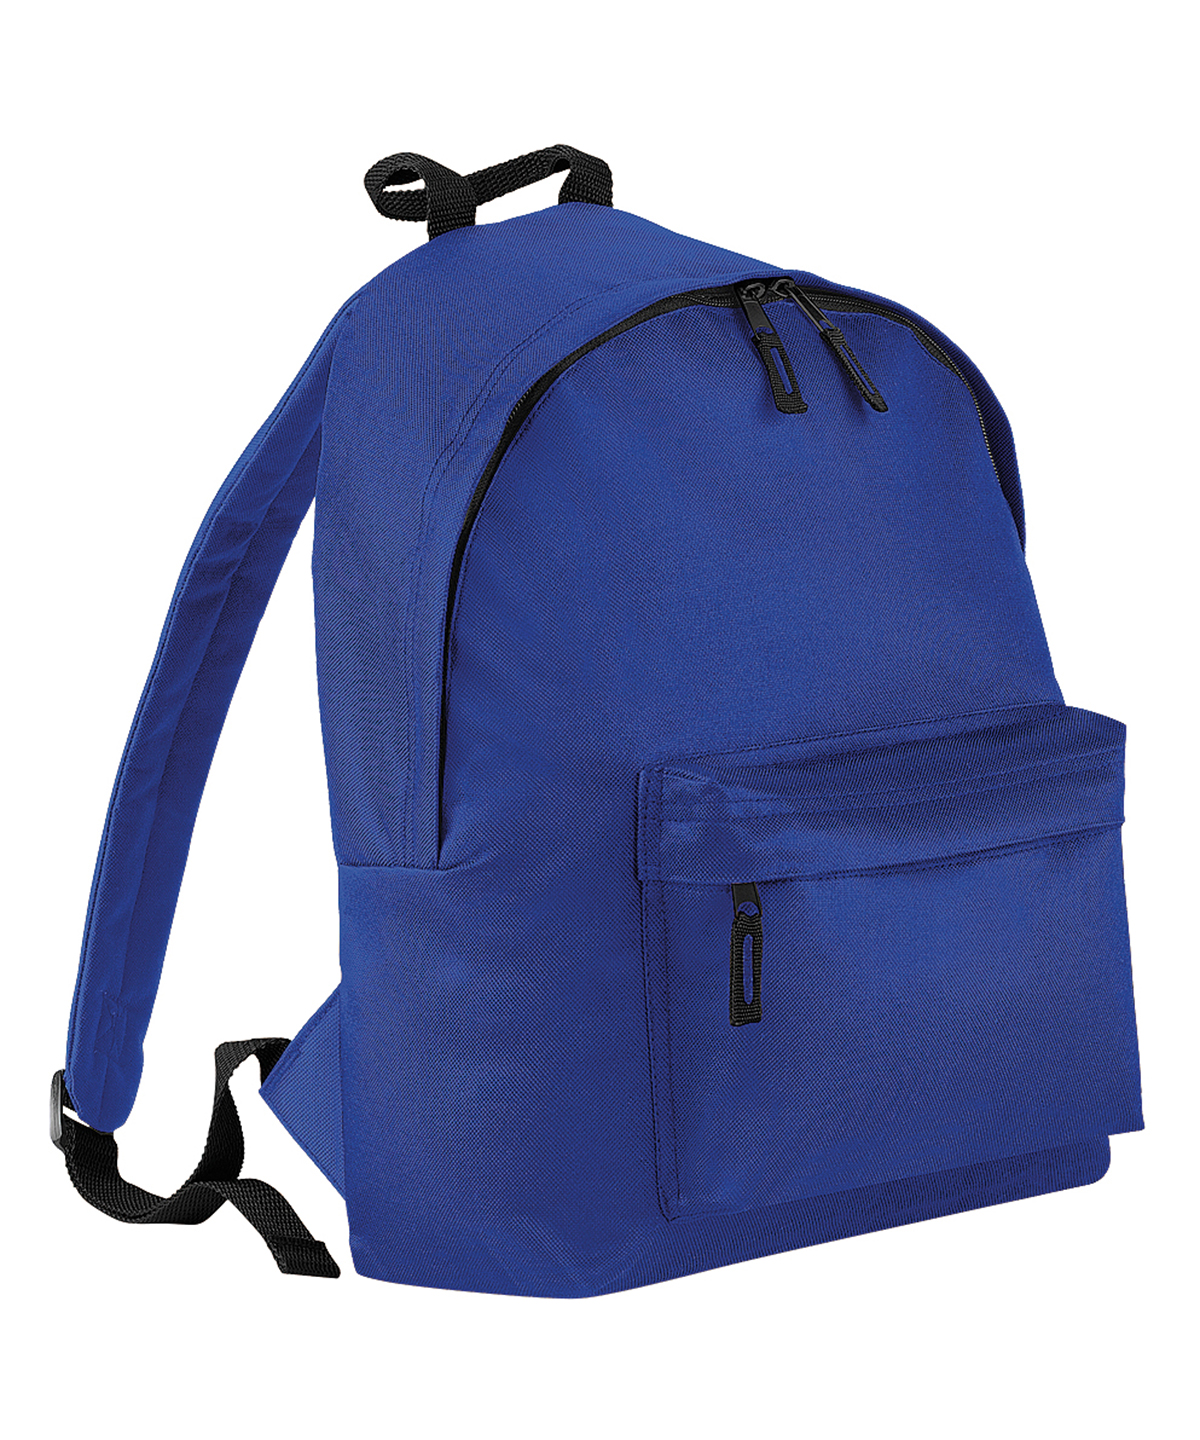 Junior Fashion Backpack Bright Royal Size One Size